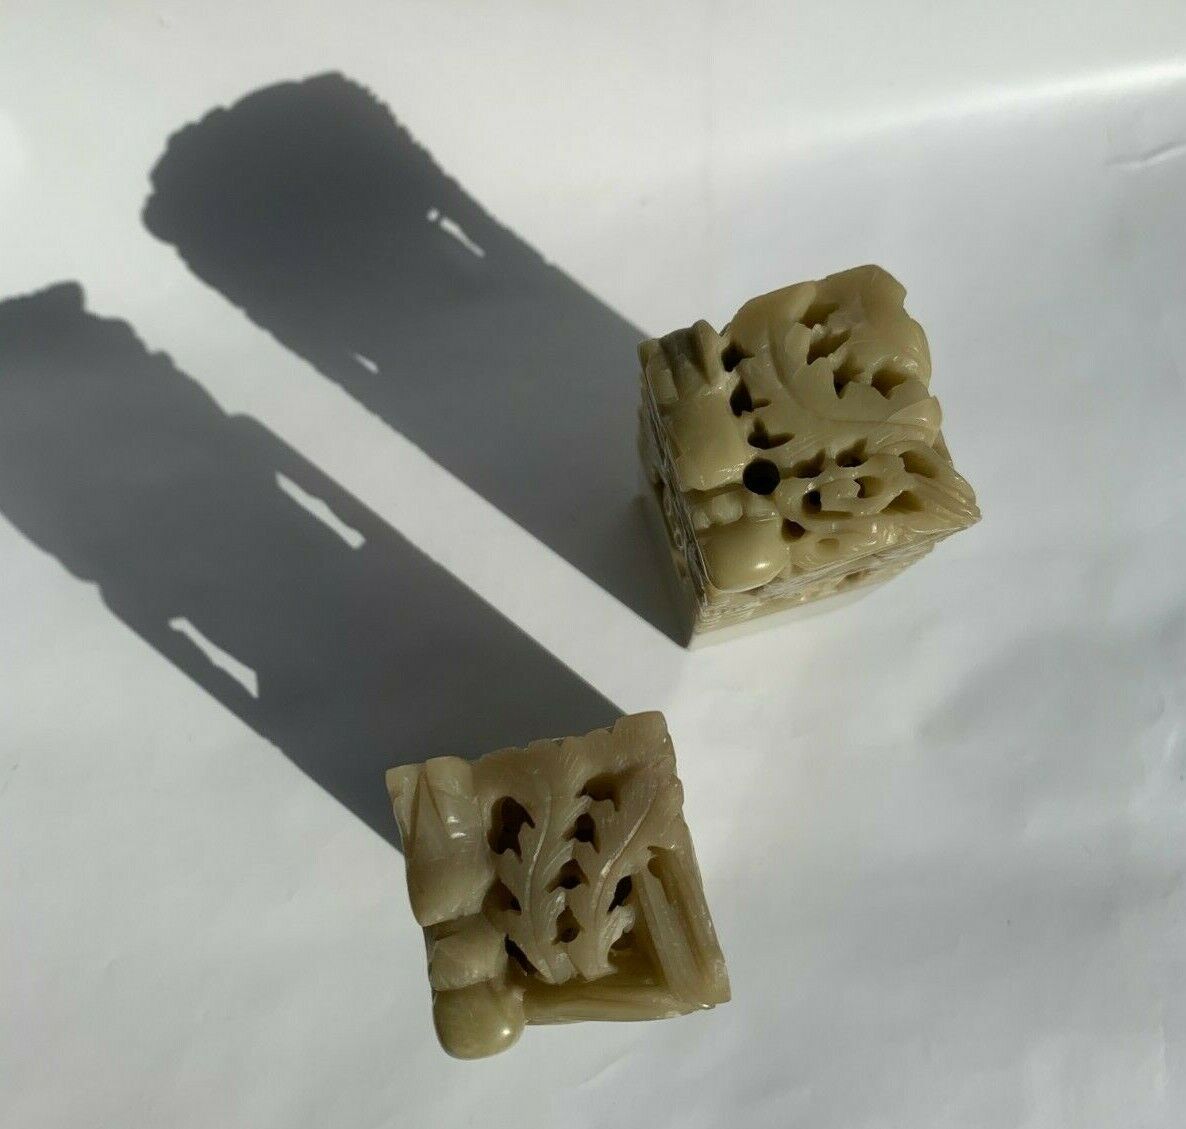 Two (2) CHINESE JADE HAND CARVED STONE NAME STAMPS - "MARTY" & "GIM" Без бренда - фотография #6